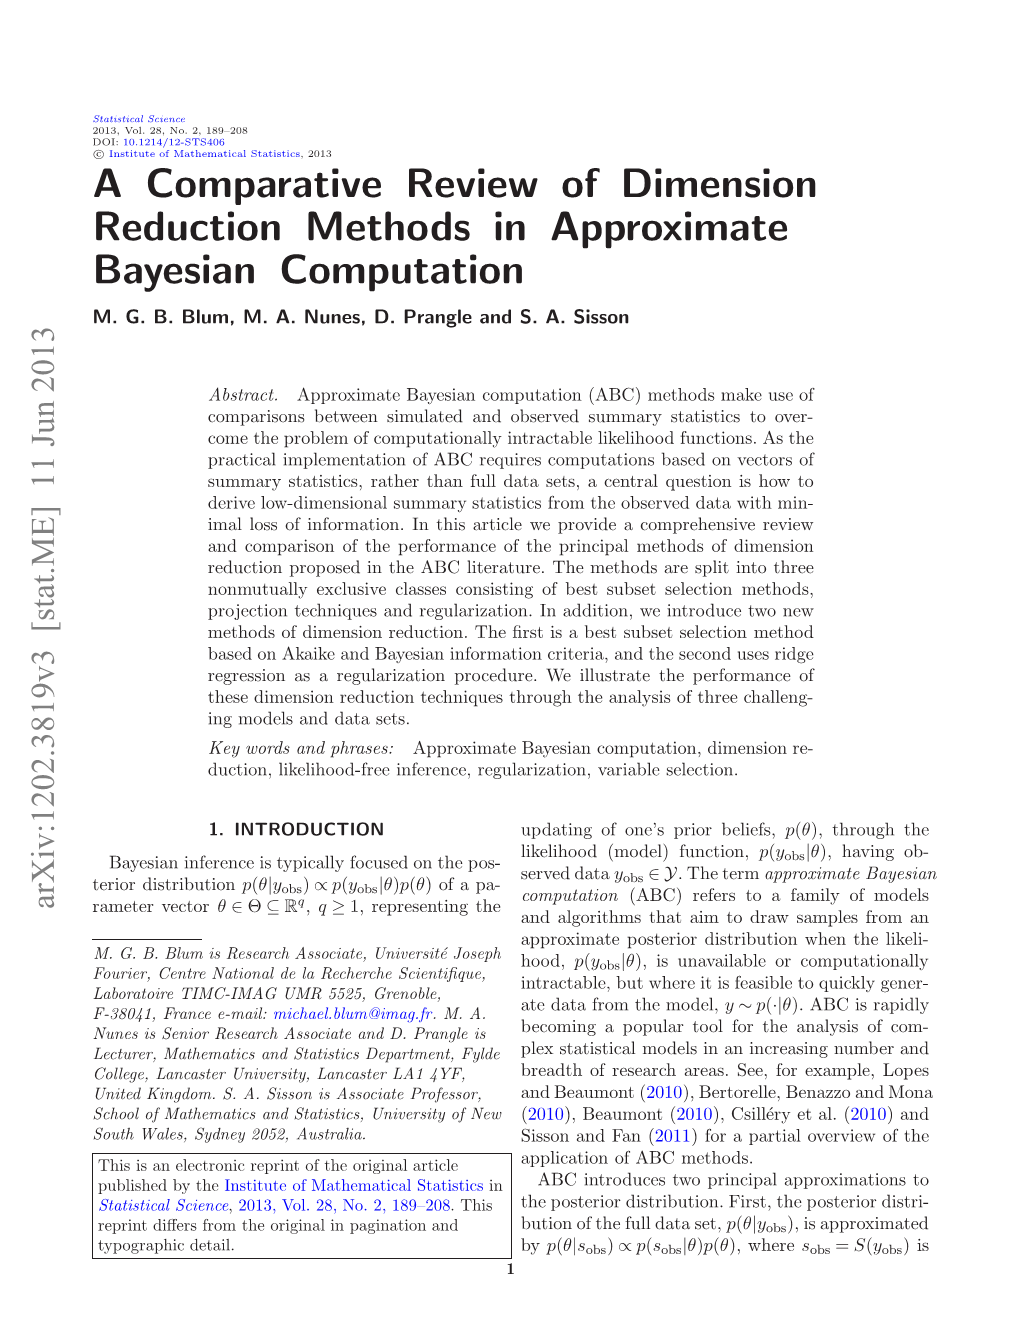 A Comparative Review of Dimension Reduction Methods in Approximate Bayesian Computation